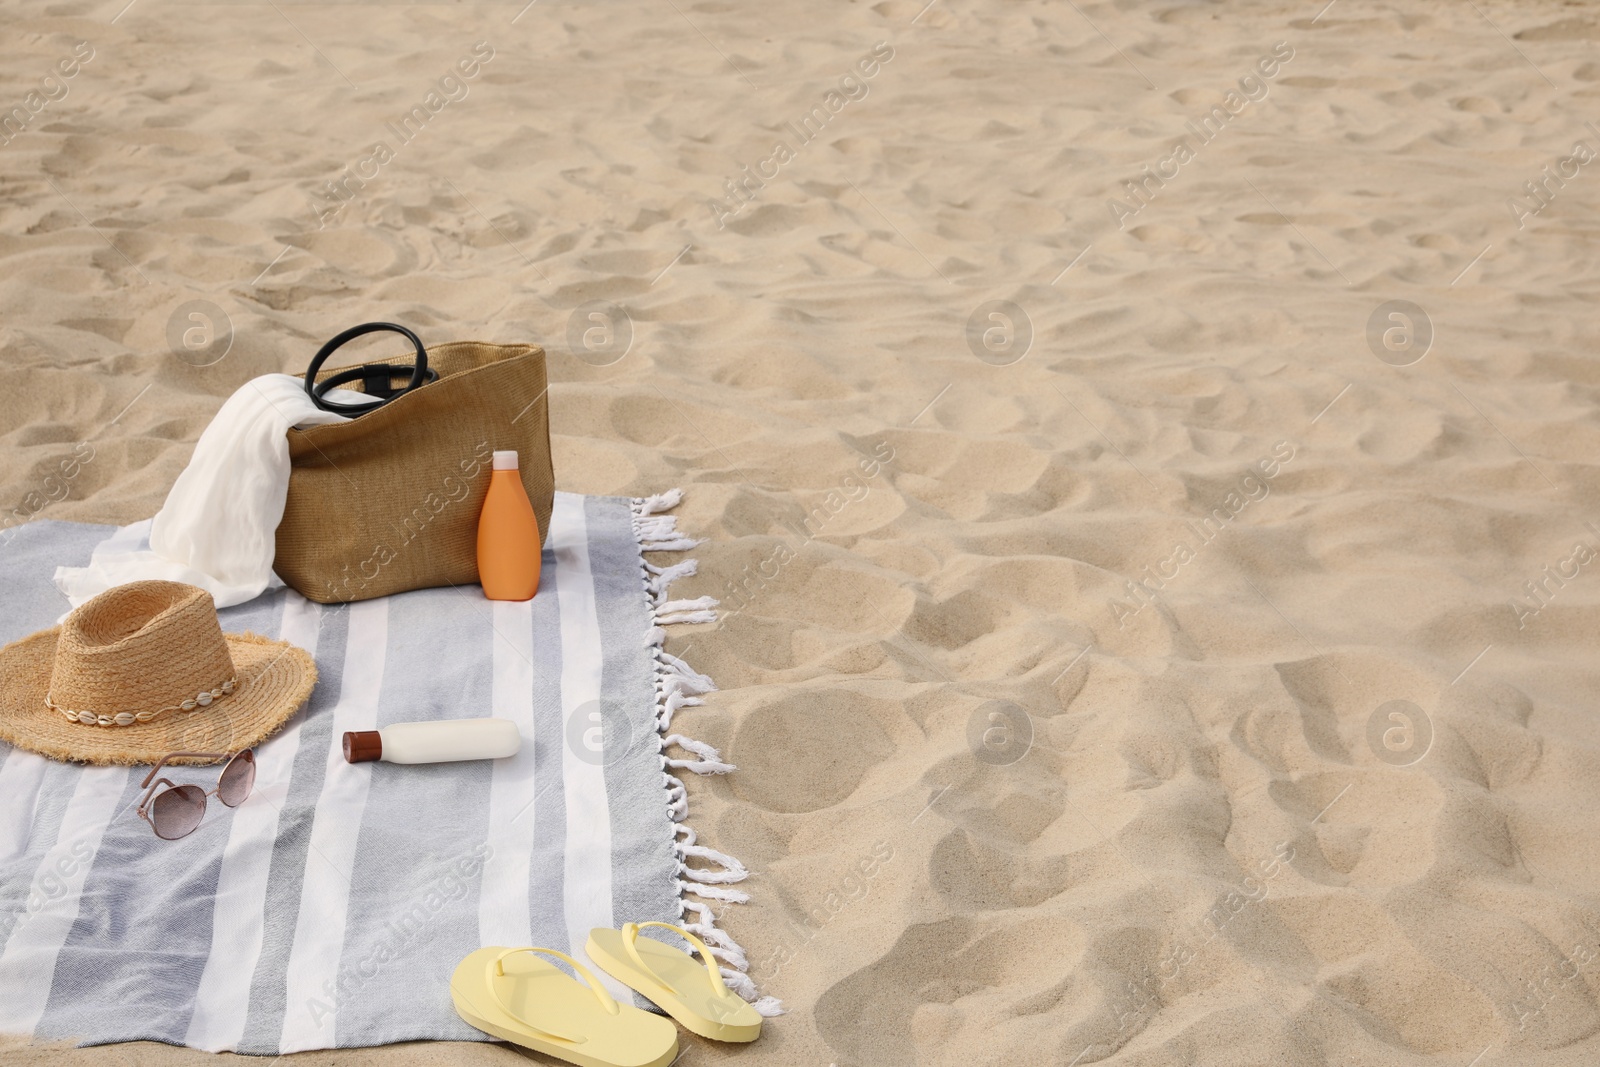 Photo of Bag and other beach items on sand, space for text